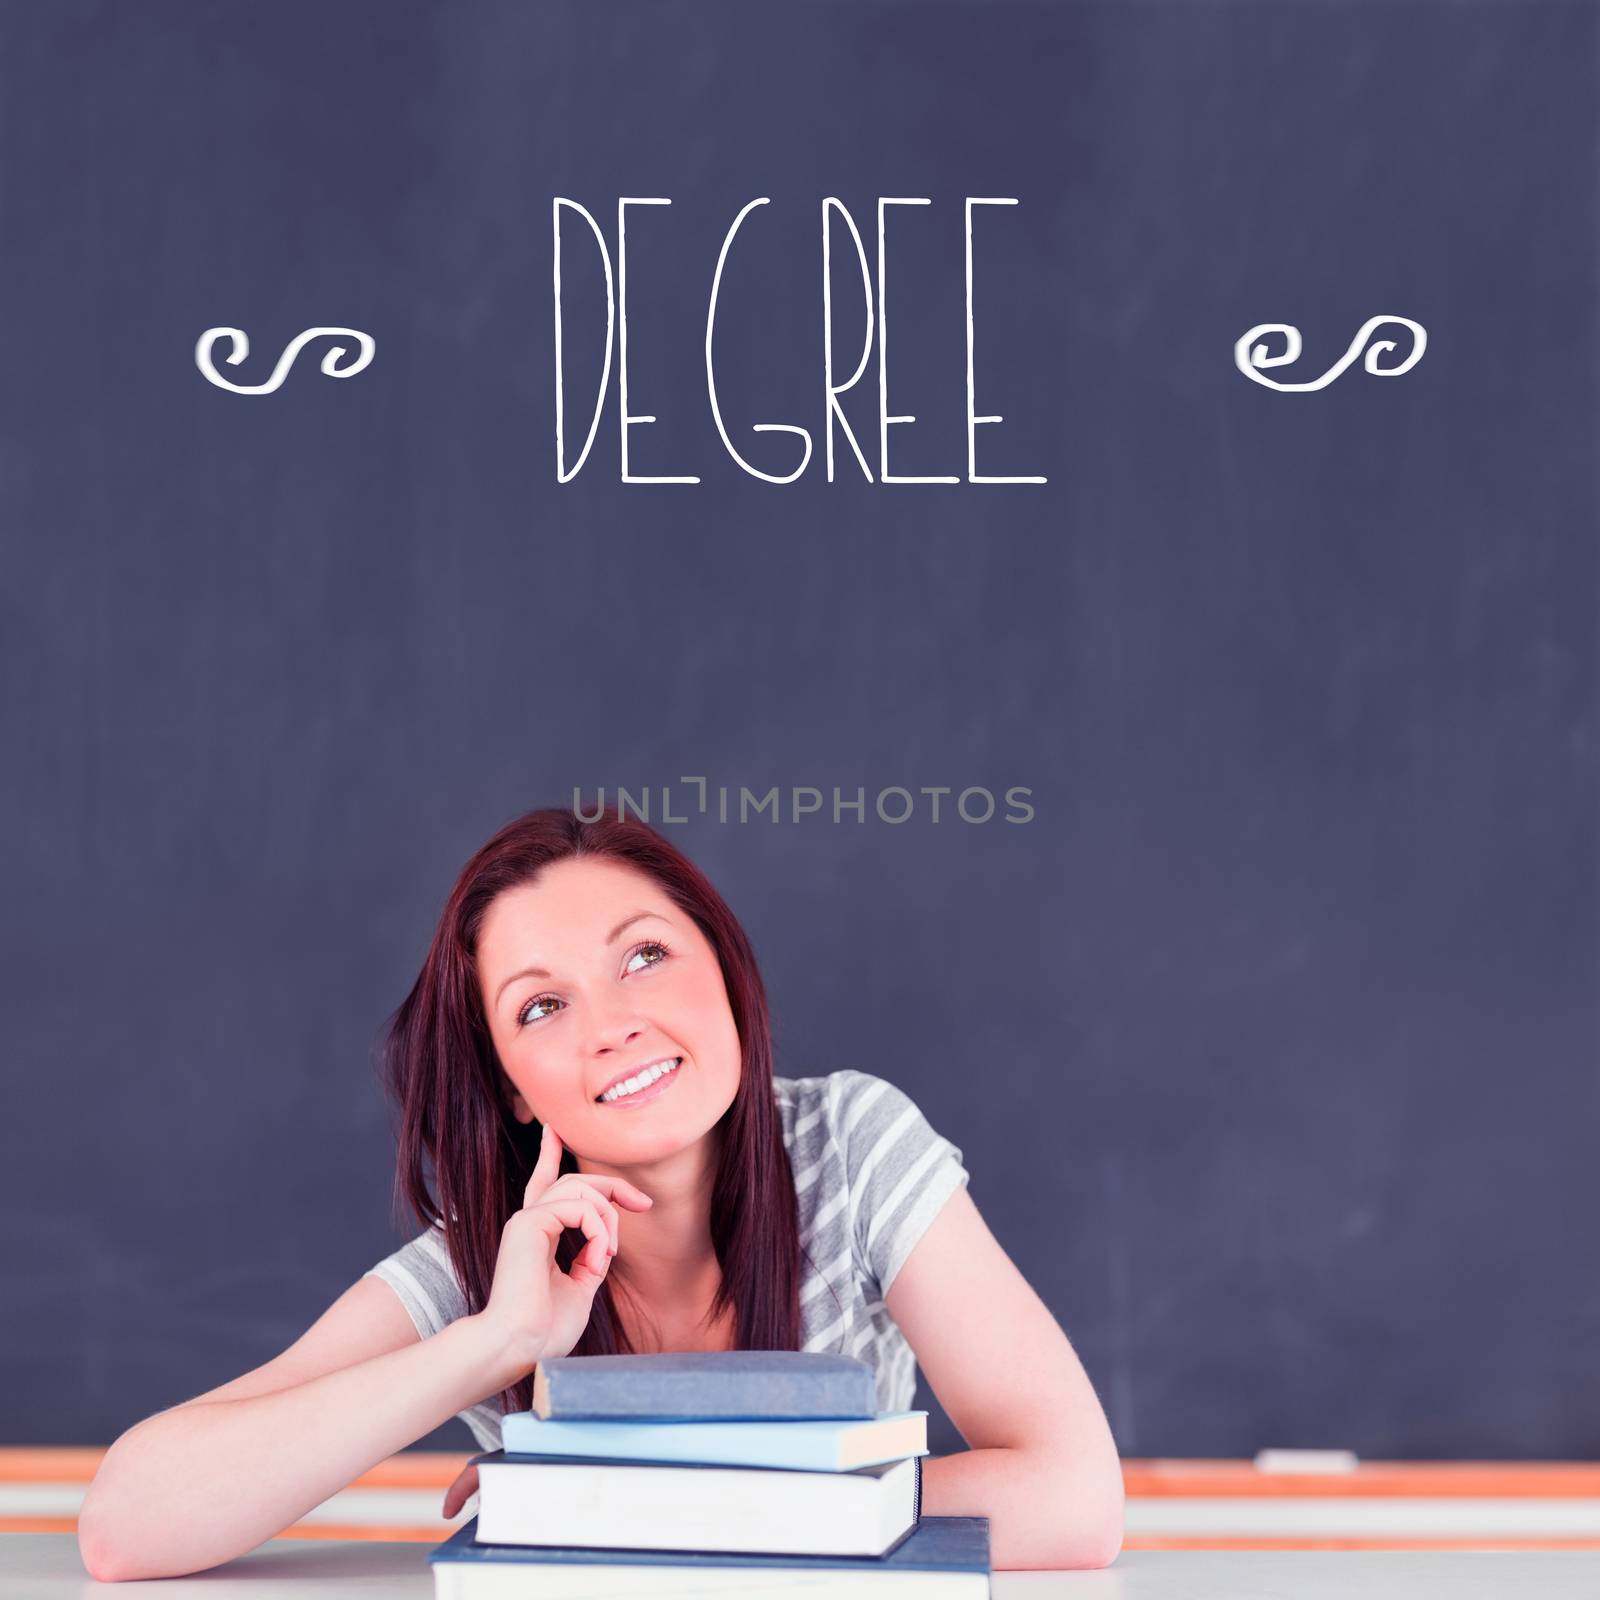 The word degree against student thinking in classroom